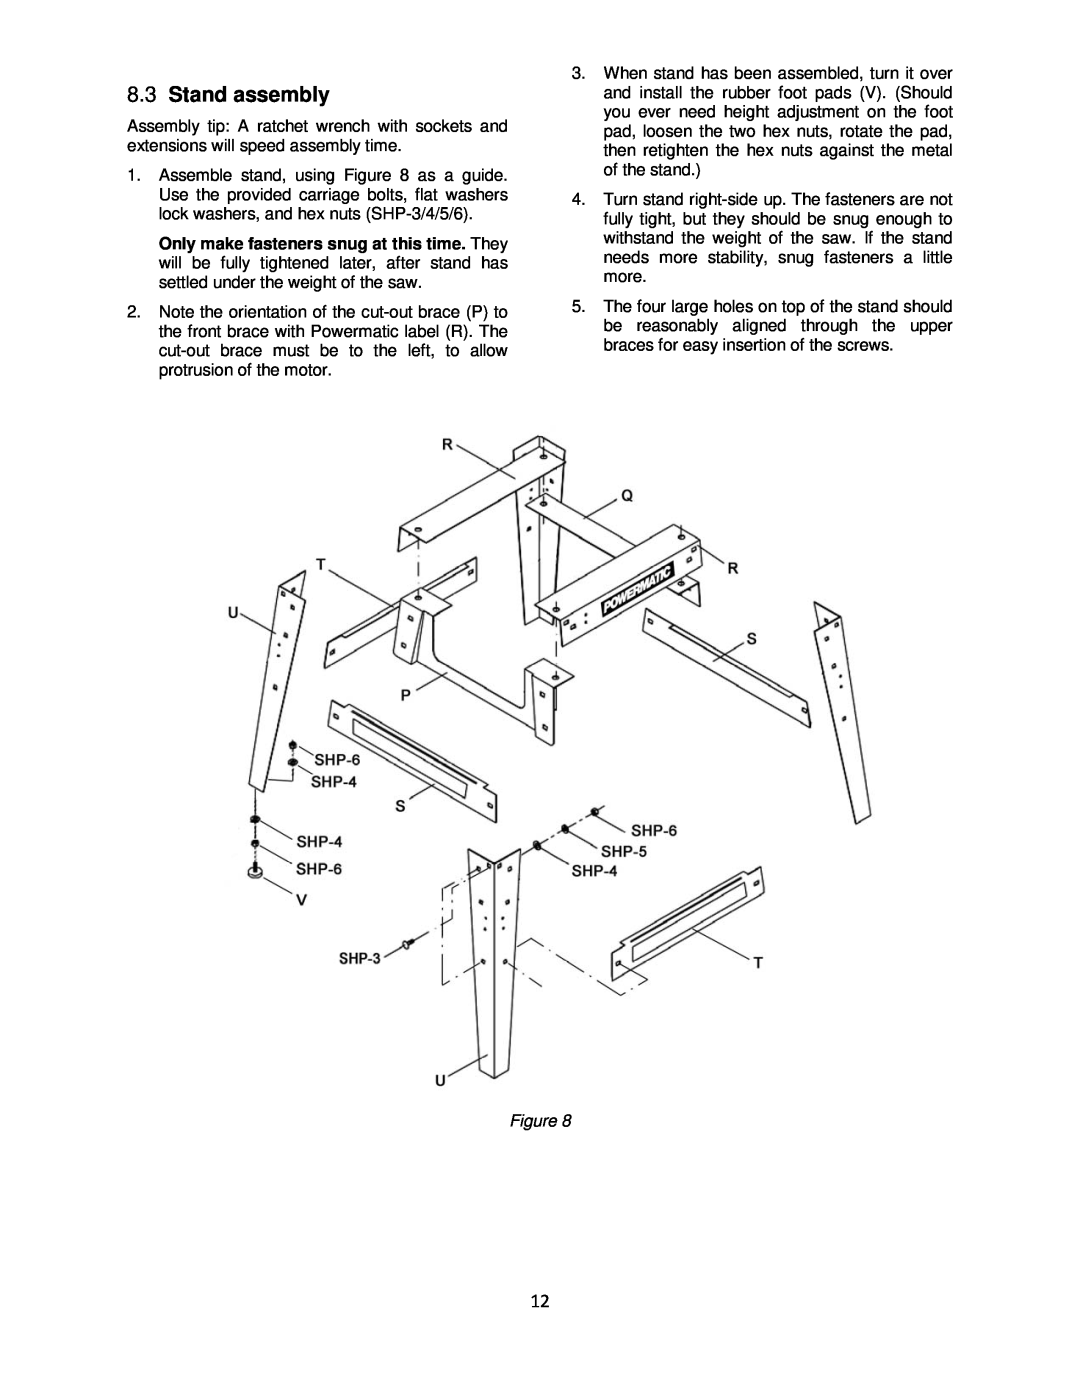 Powermatic 64B operating instructions Stand assembly 